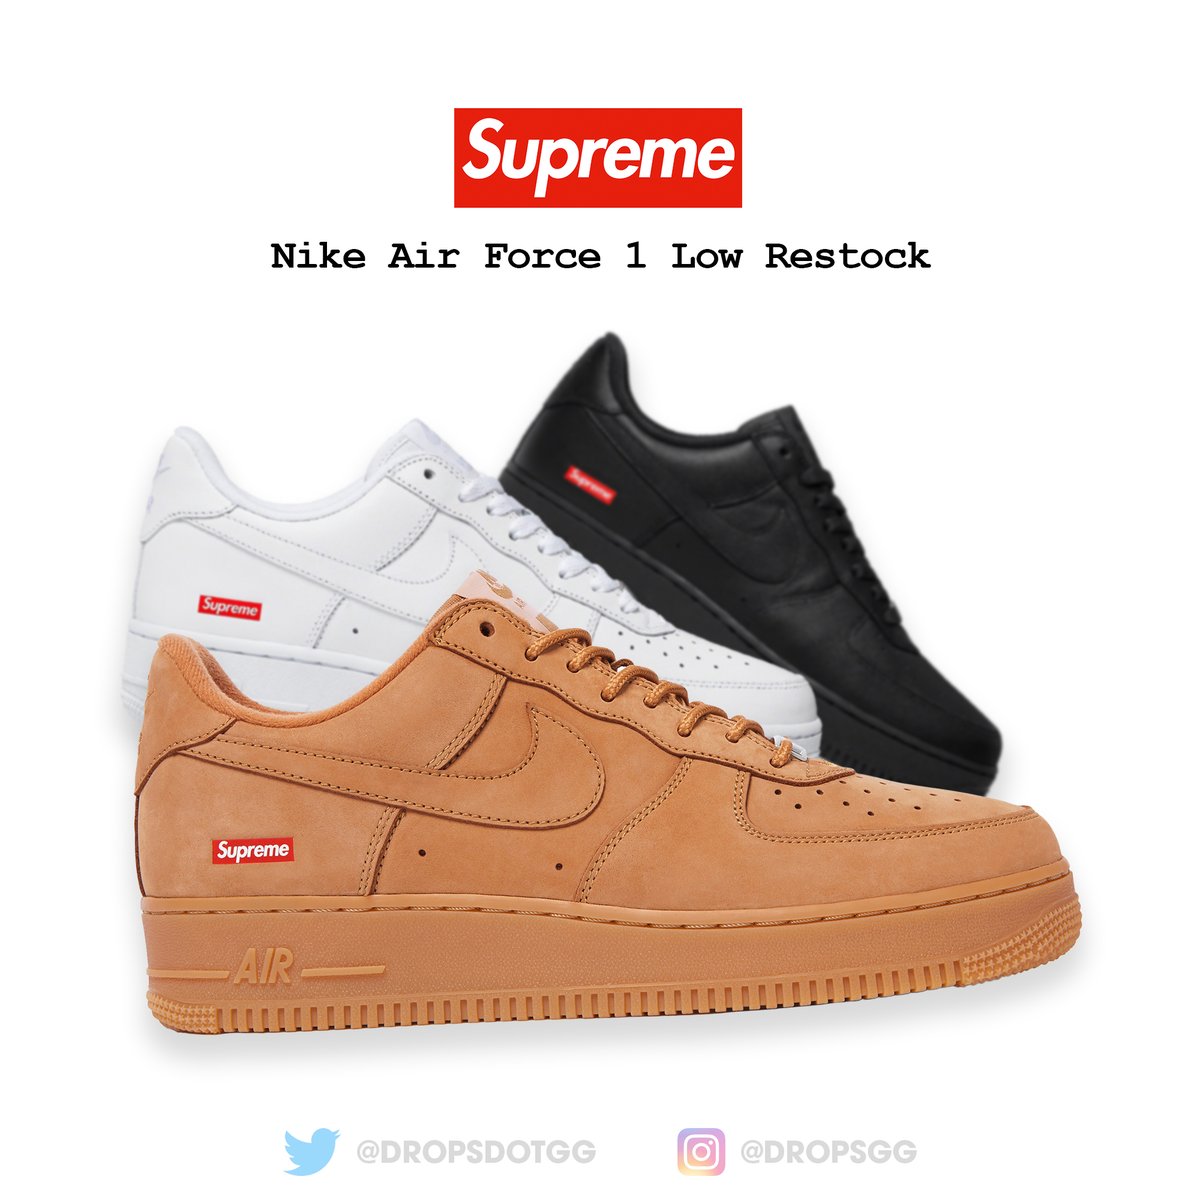 DropsByJay on X: Supreme/Nike Air Force As leaked by @Py_rates a few weeks  ago, we are expected to see a new take on the Supreme Air Force 1 Low later  this year.